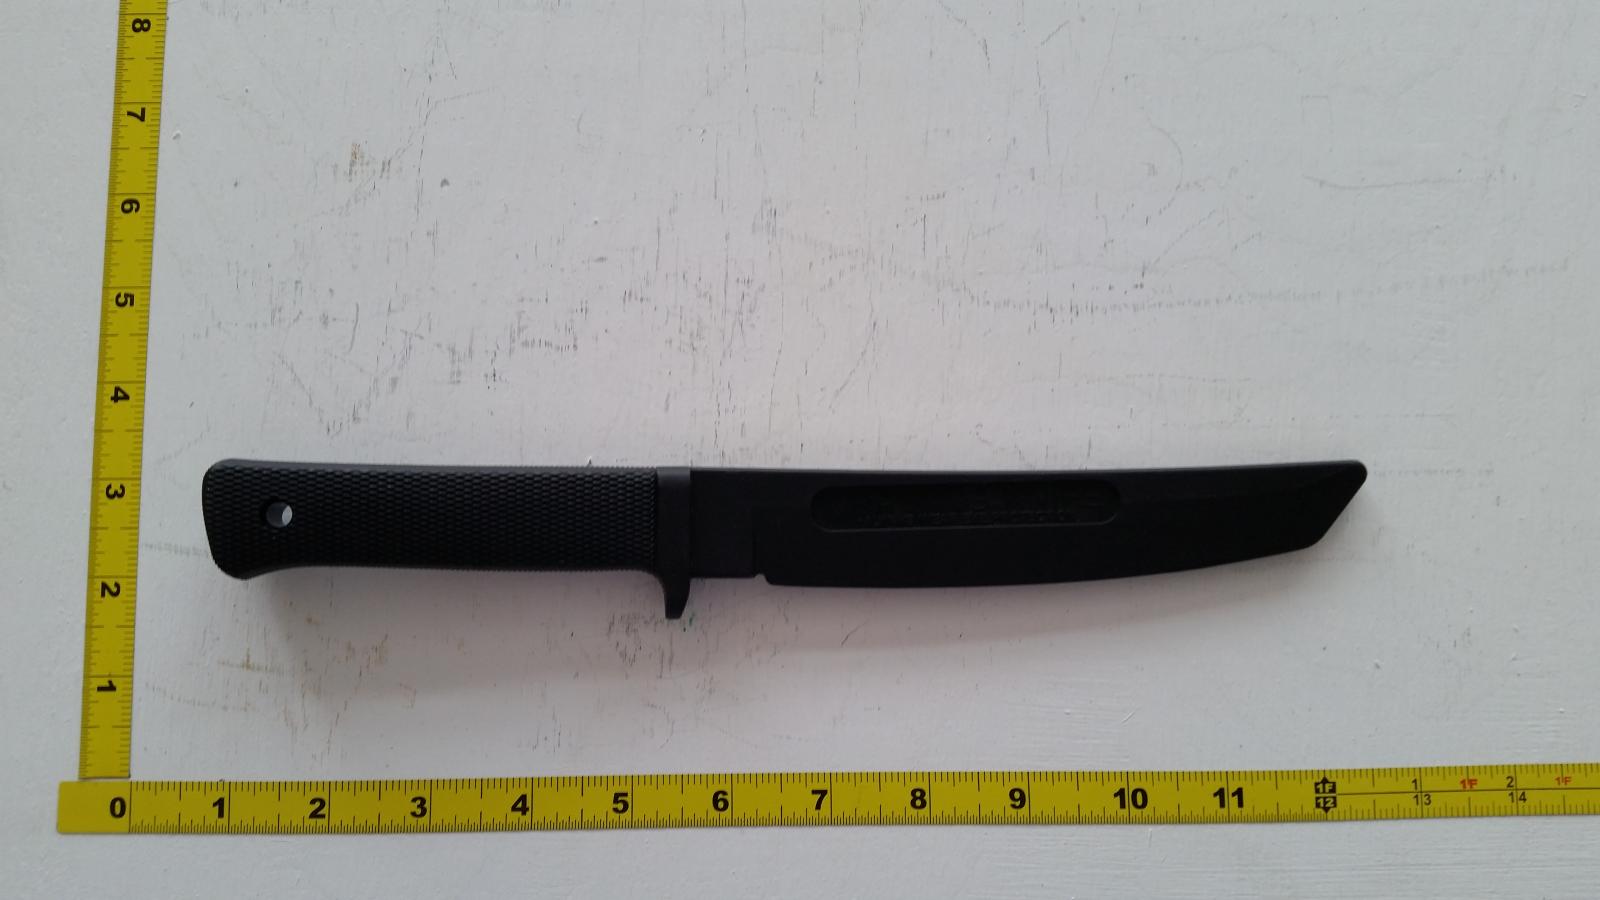 Rigid Molded Plastic Practice Knife, Light Weight, Good Detail - NOT approved for blade-to-blade stage combat.